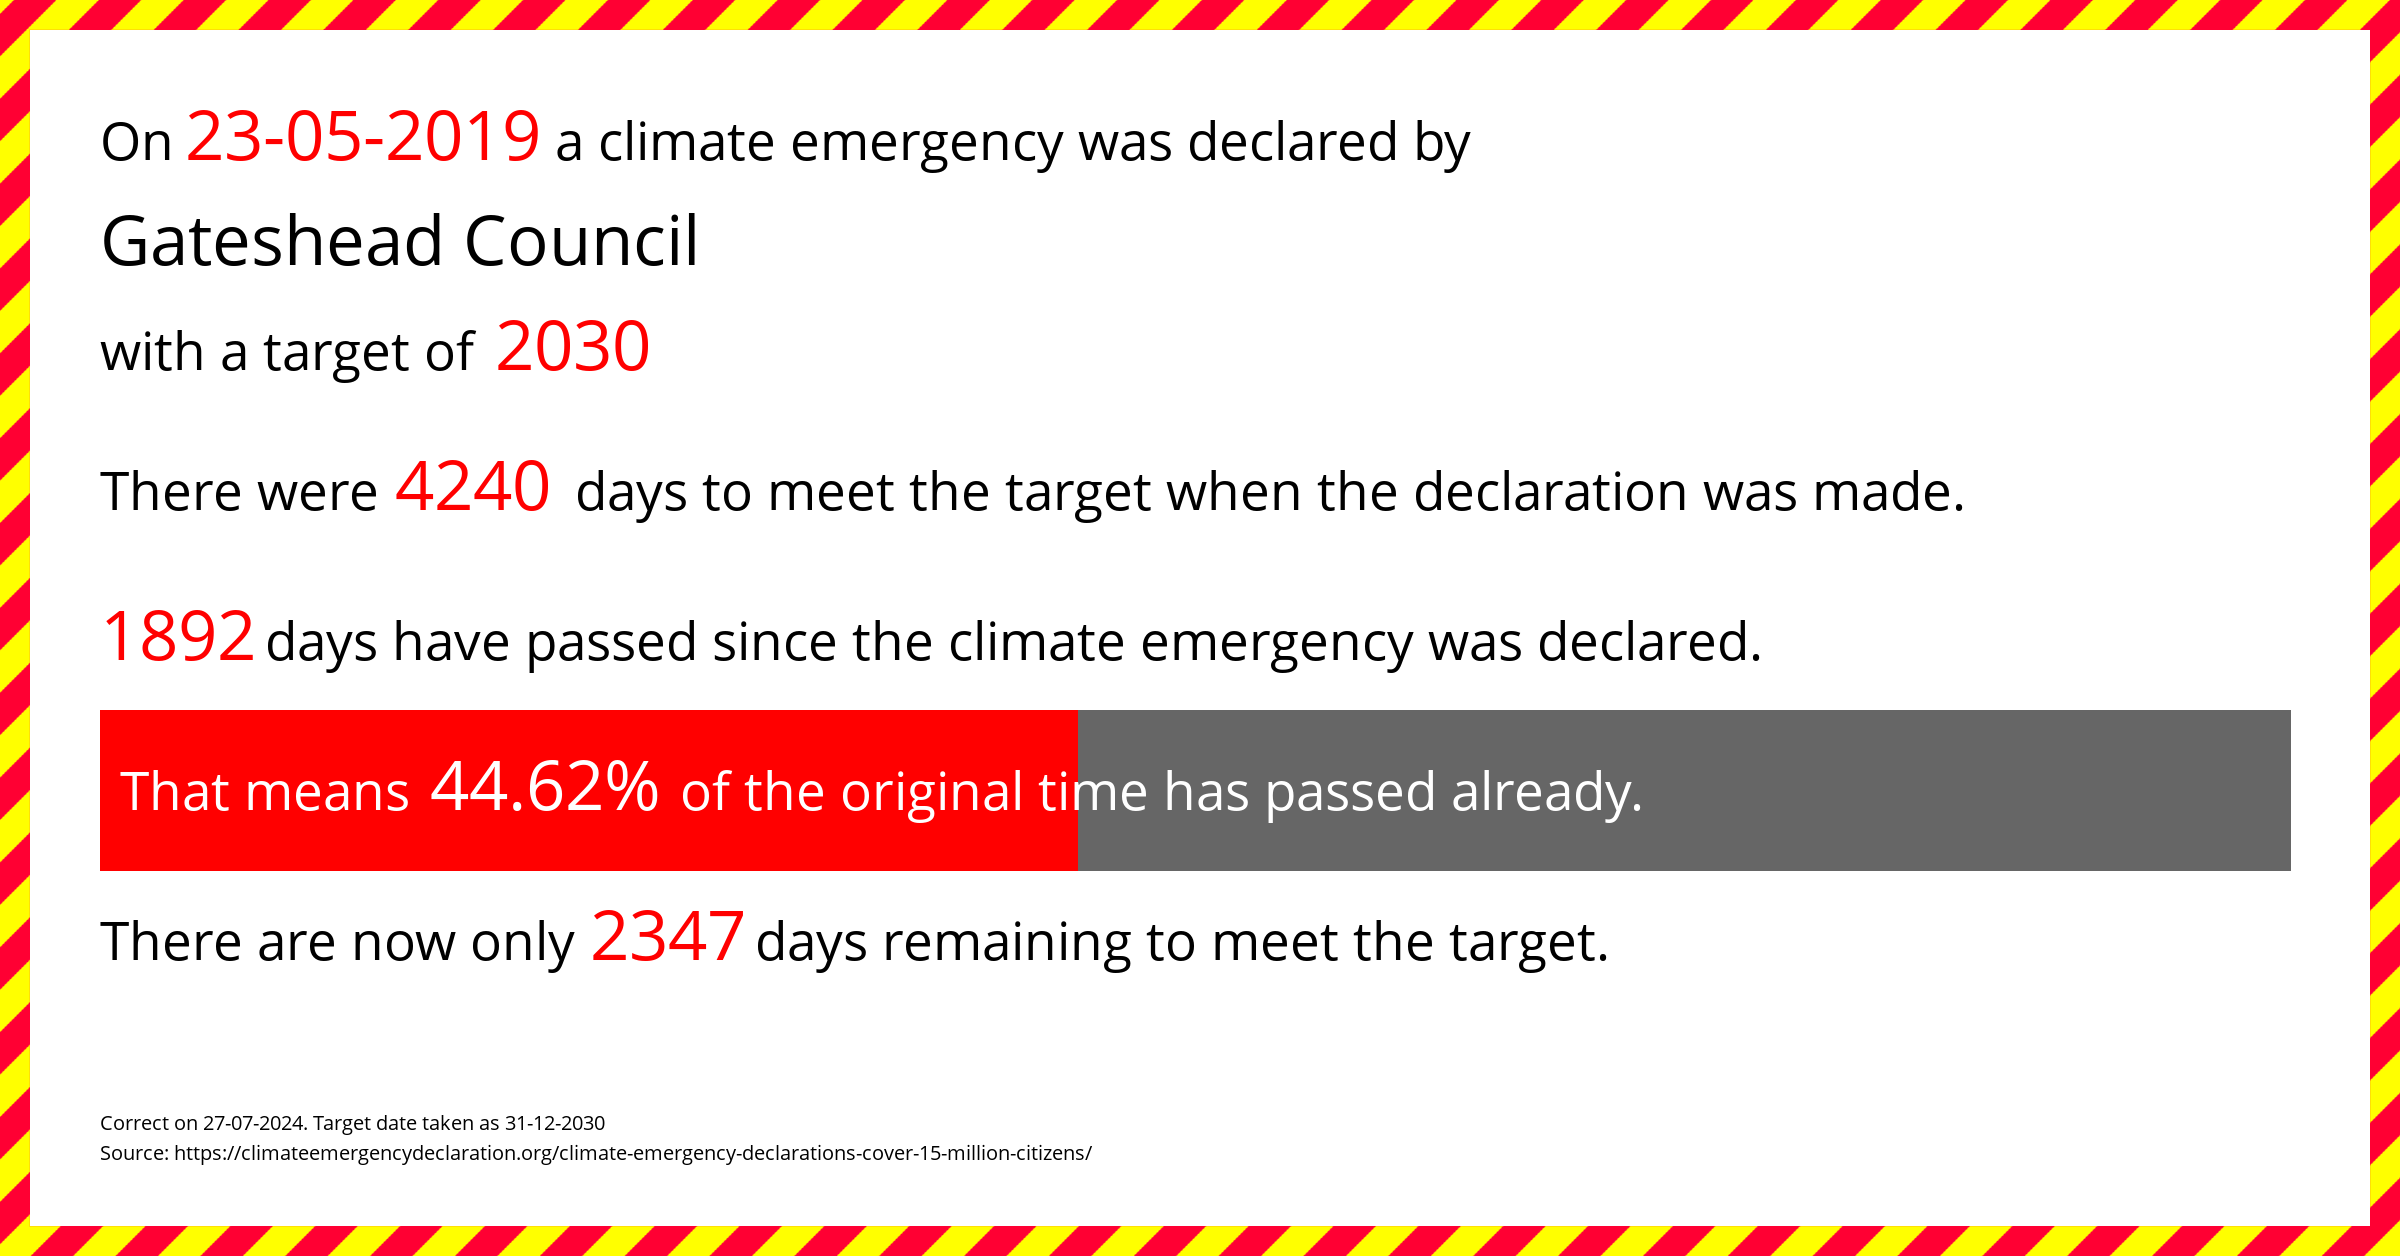 Gateshead Council declared a Climate emergency on Thursday 23rd May 2019, with a target of 2030.